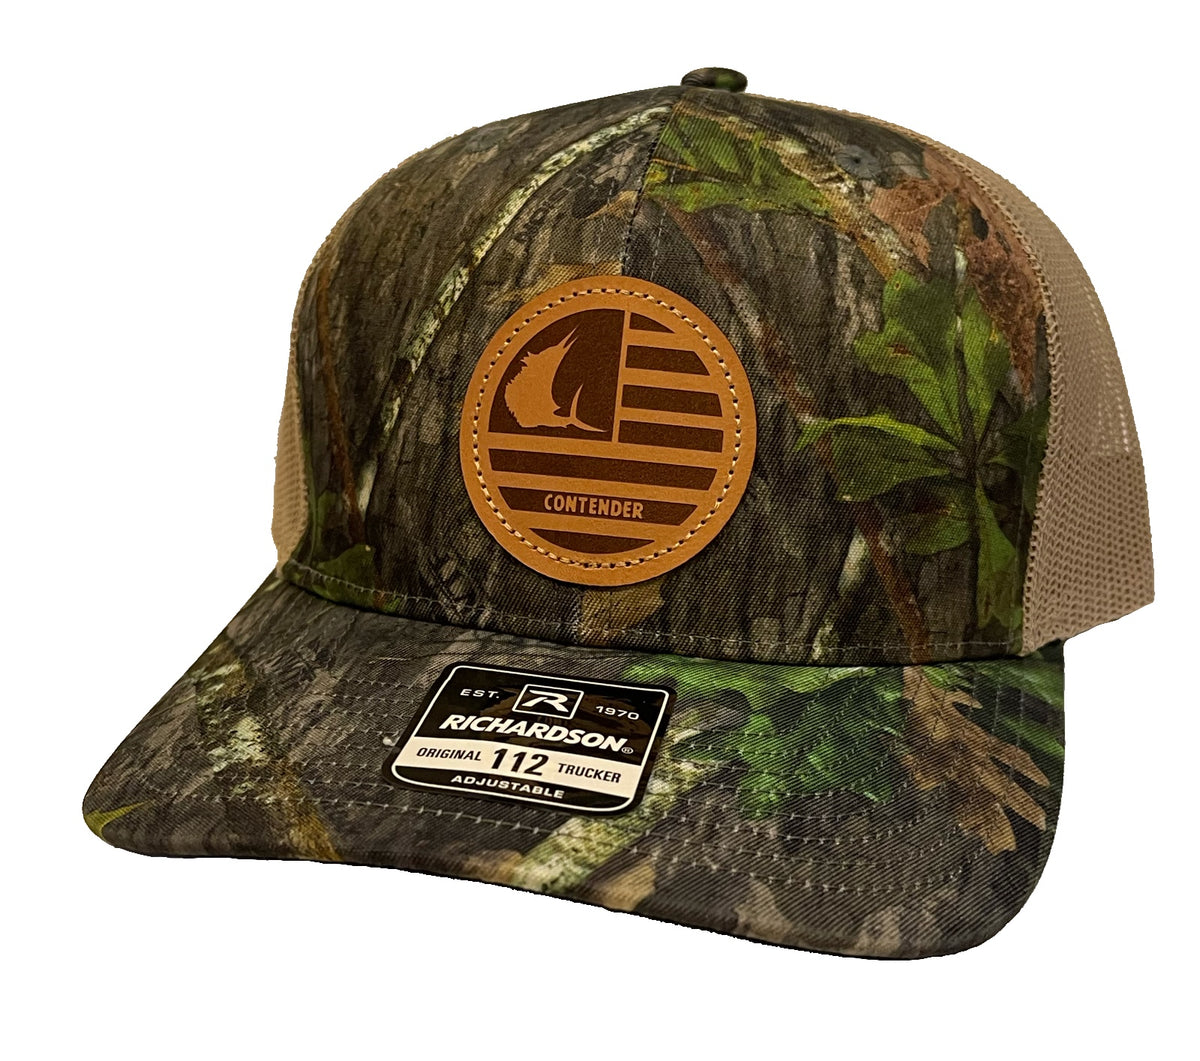 Contender Mossy Oak Camo Trucker Hat with Patriotic Leather Patch